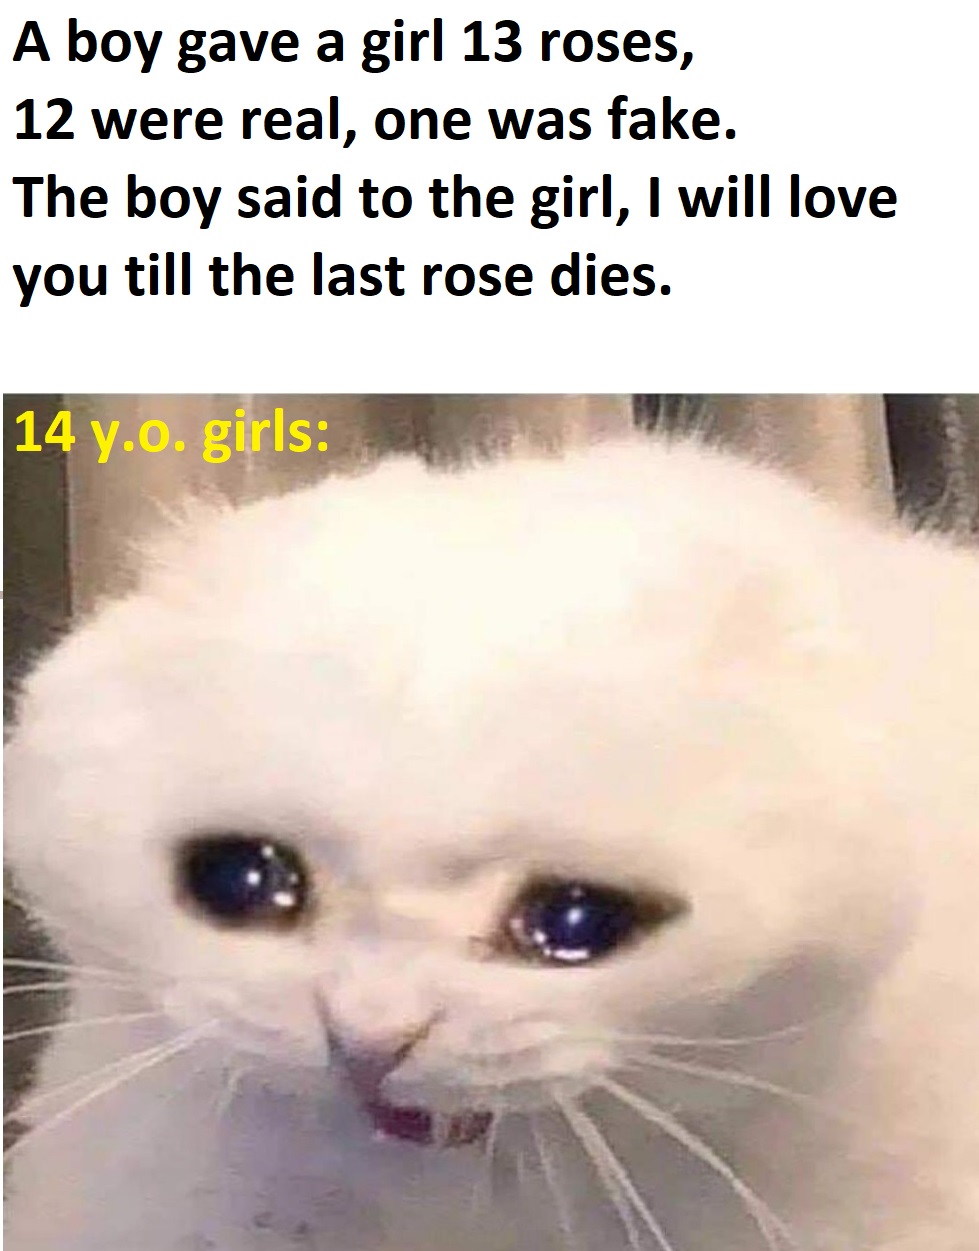 dank memes - help me memes - A boy gave a girl 13 roses, 12 were real, one was fake. The boy said to the girl, I will love you till the last rose dies. 14 y.o. girls